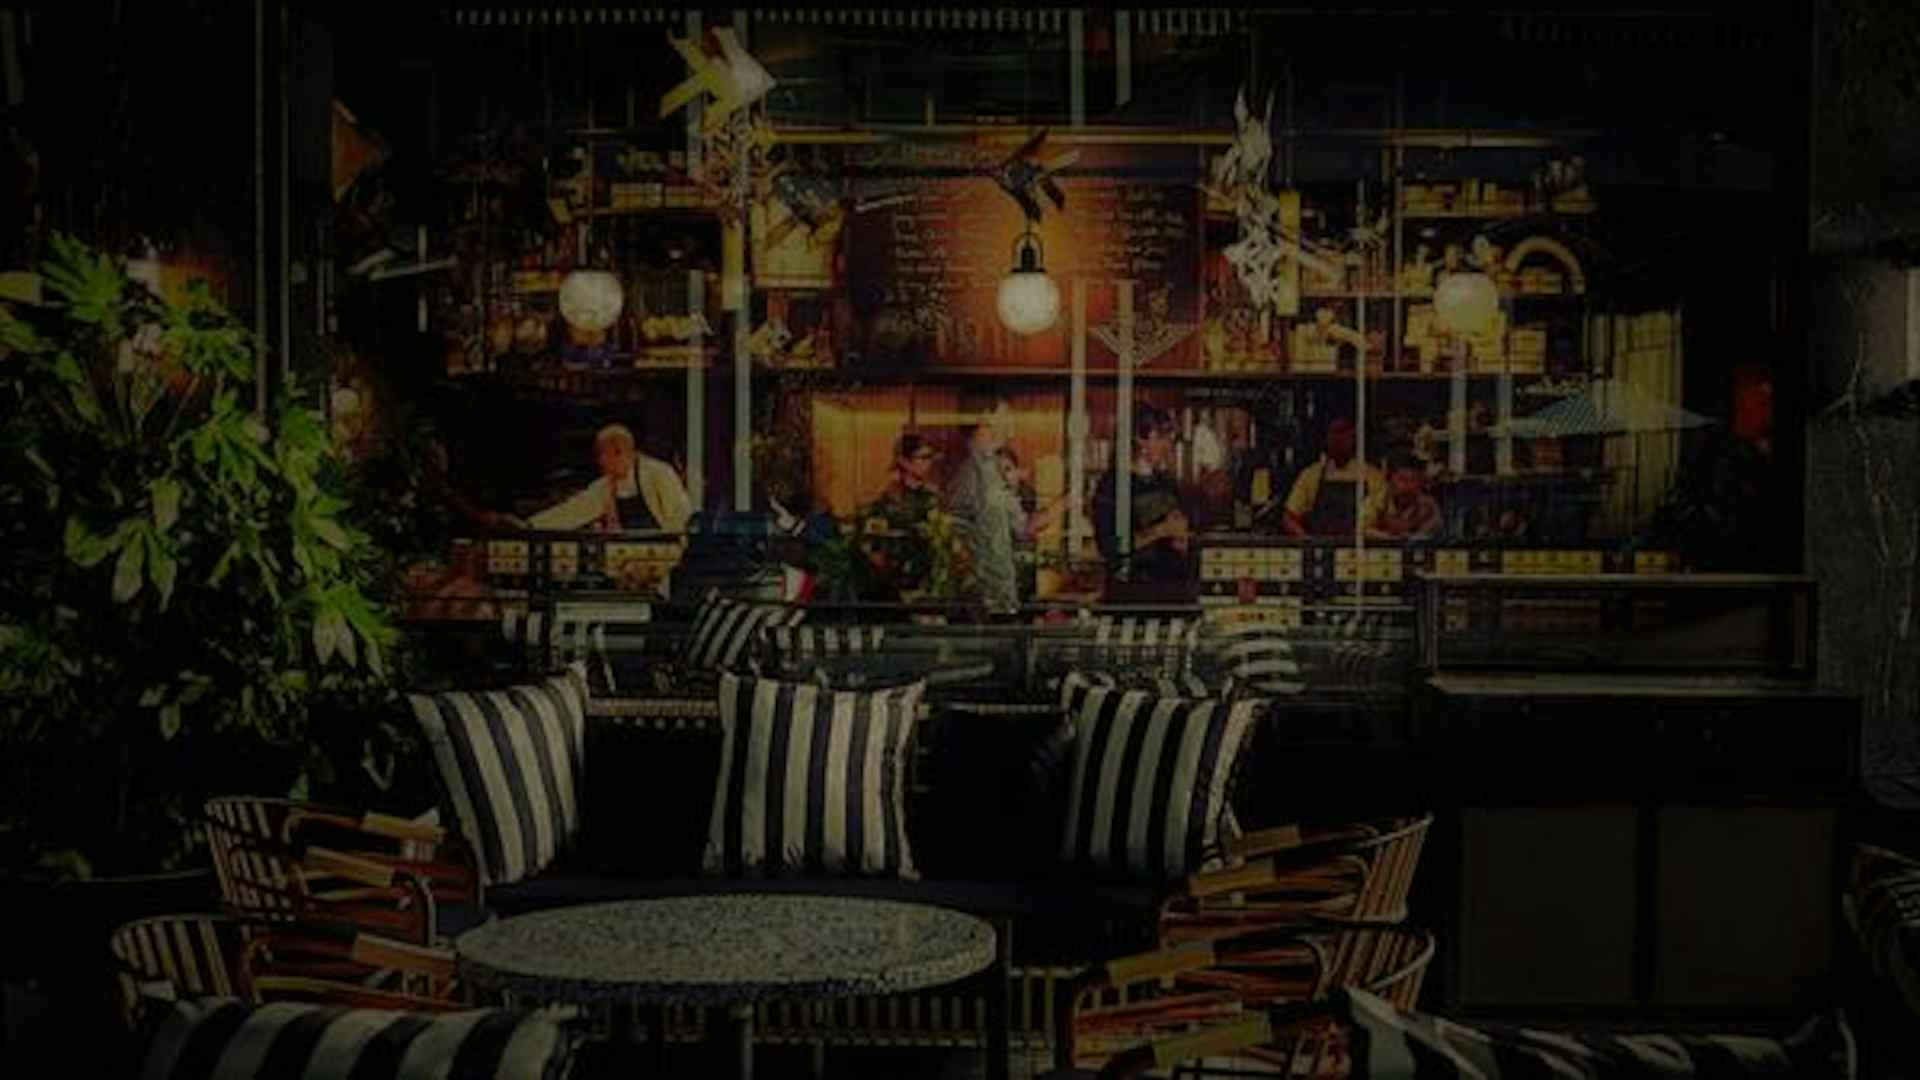 Unique Venue of the Month: Feast at the Greyhound Cafe